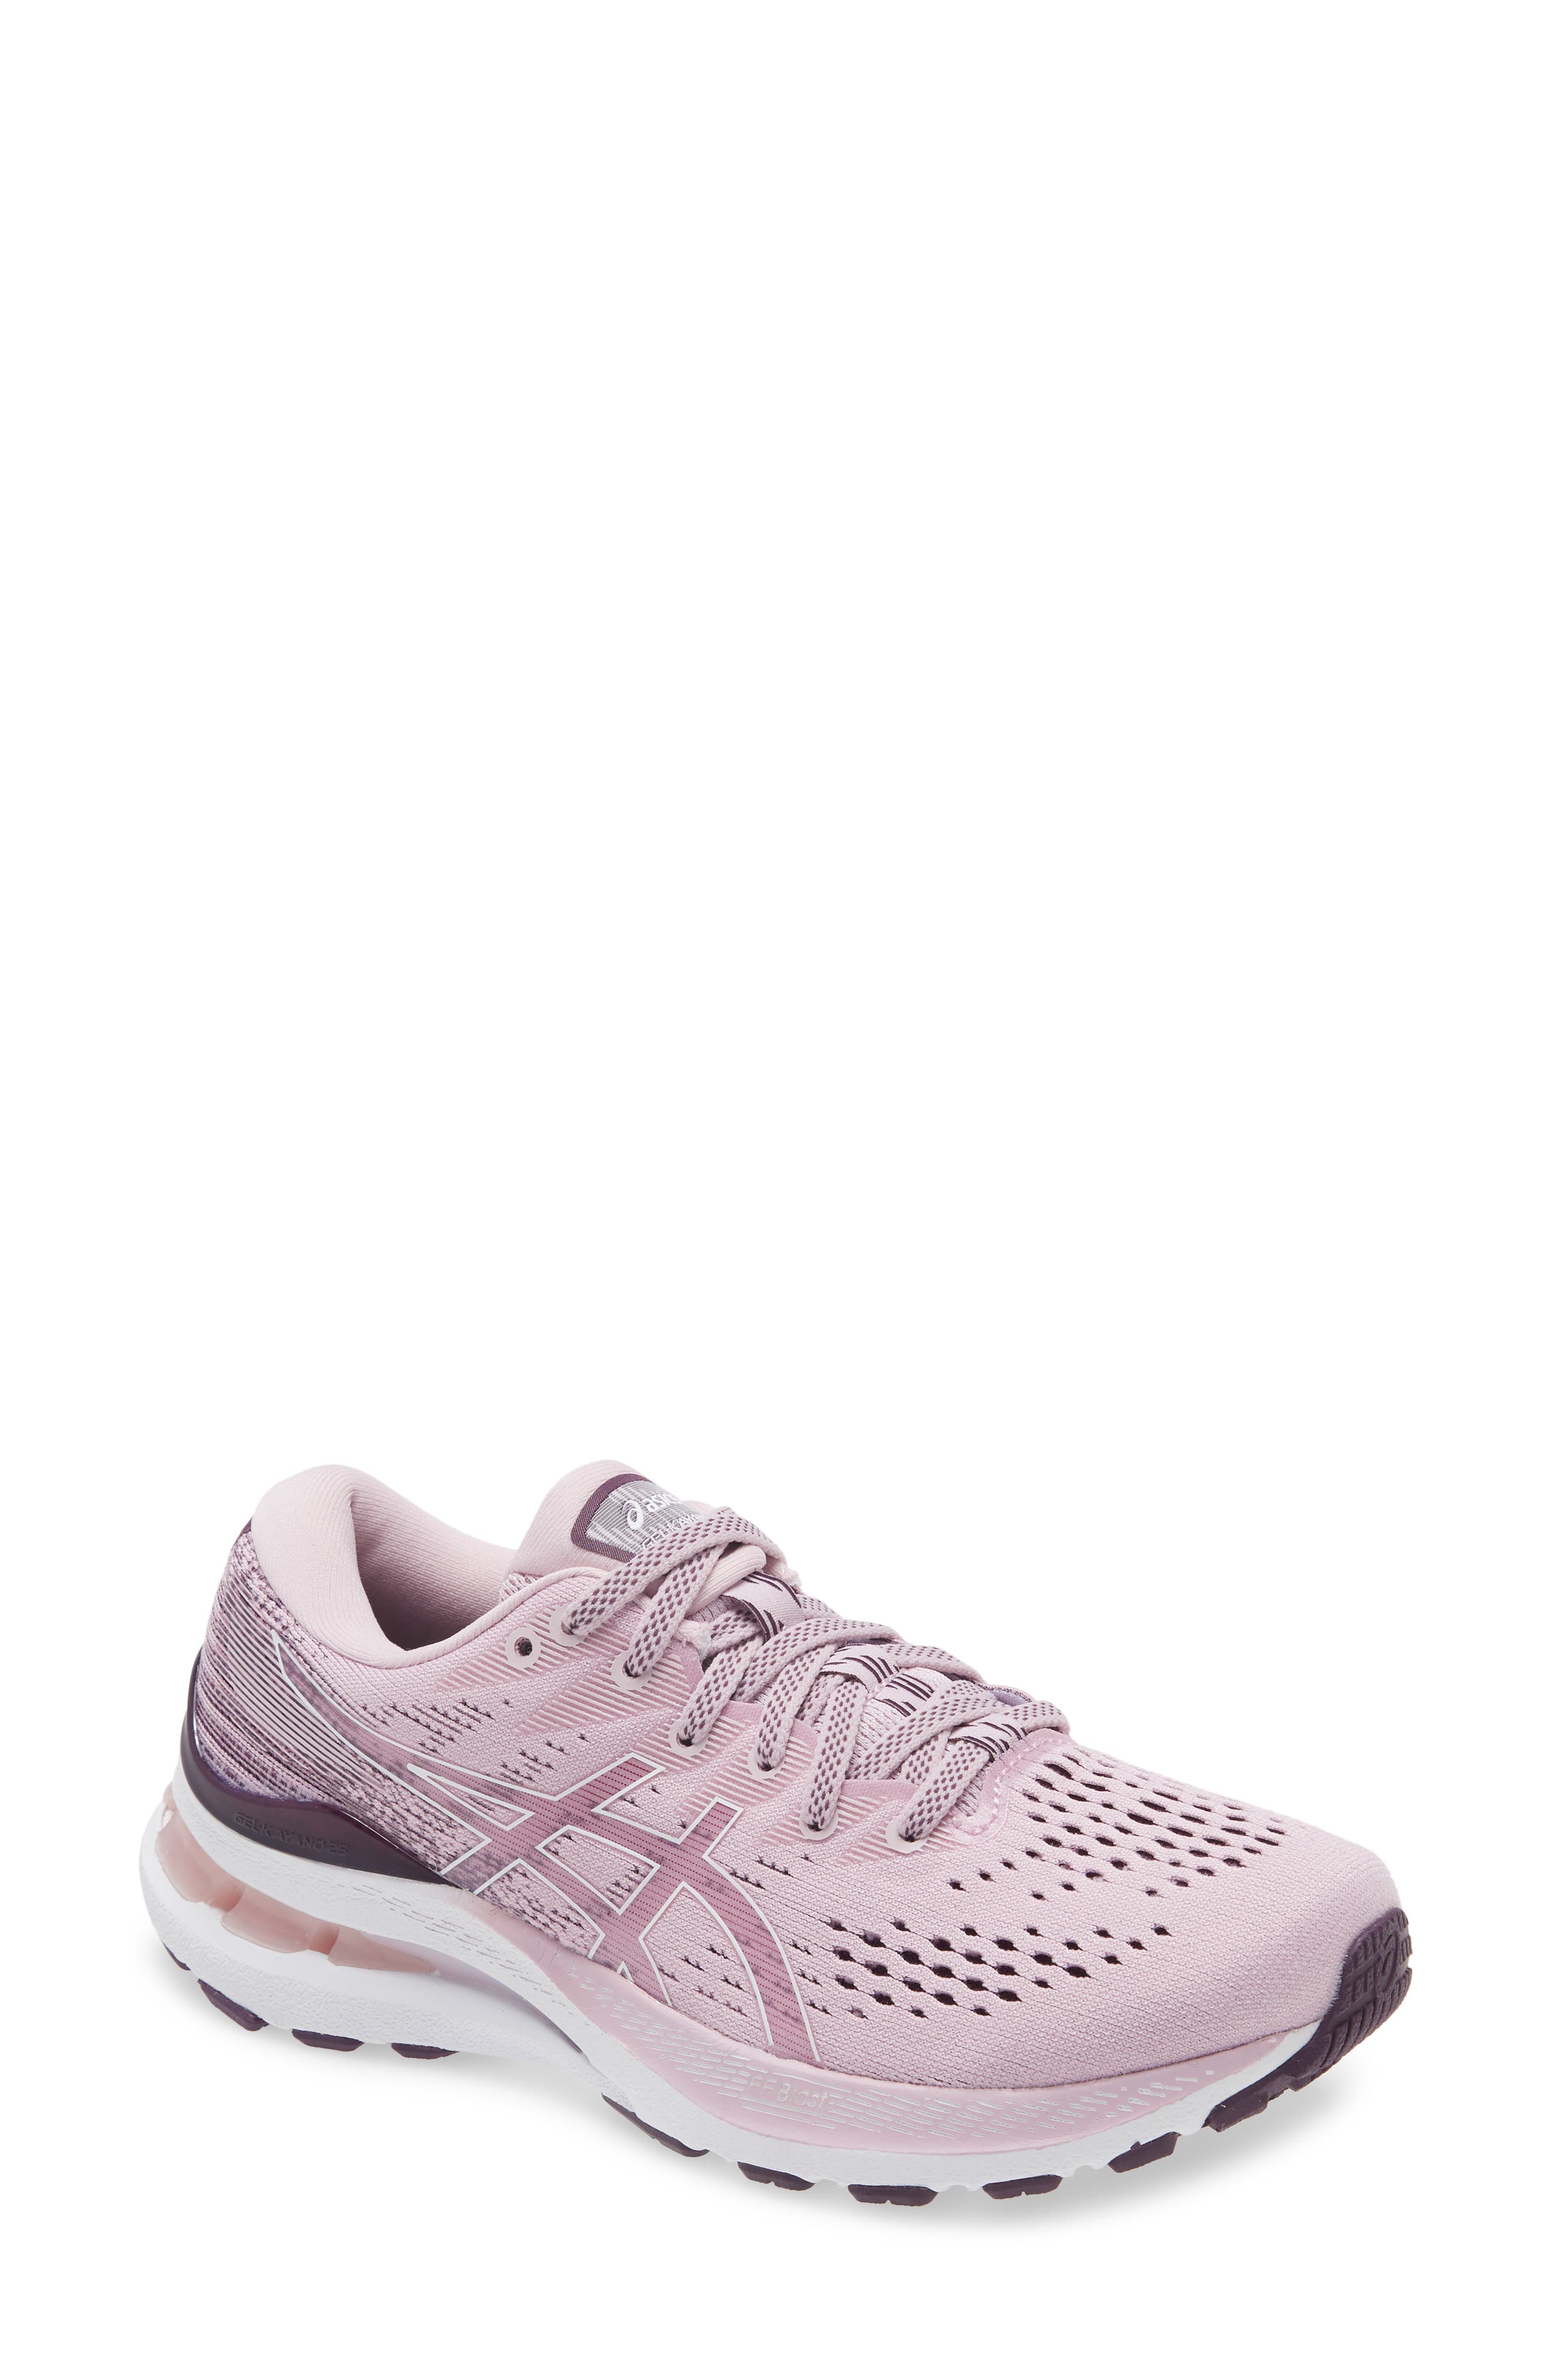 Whippet Pink White Print Running Shoes for Women-Casual Comfortable Sneakers Running Shoes